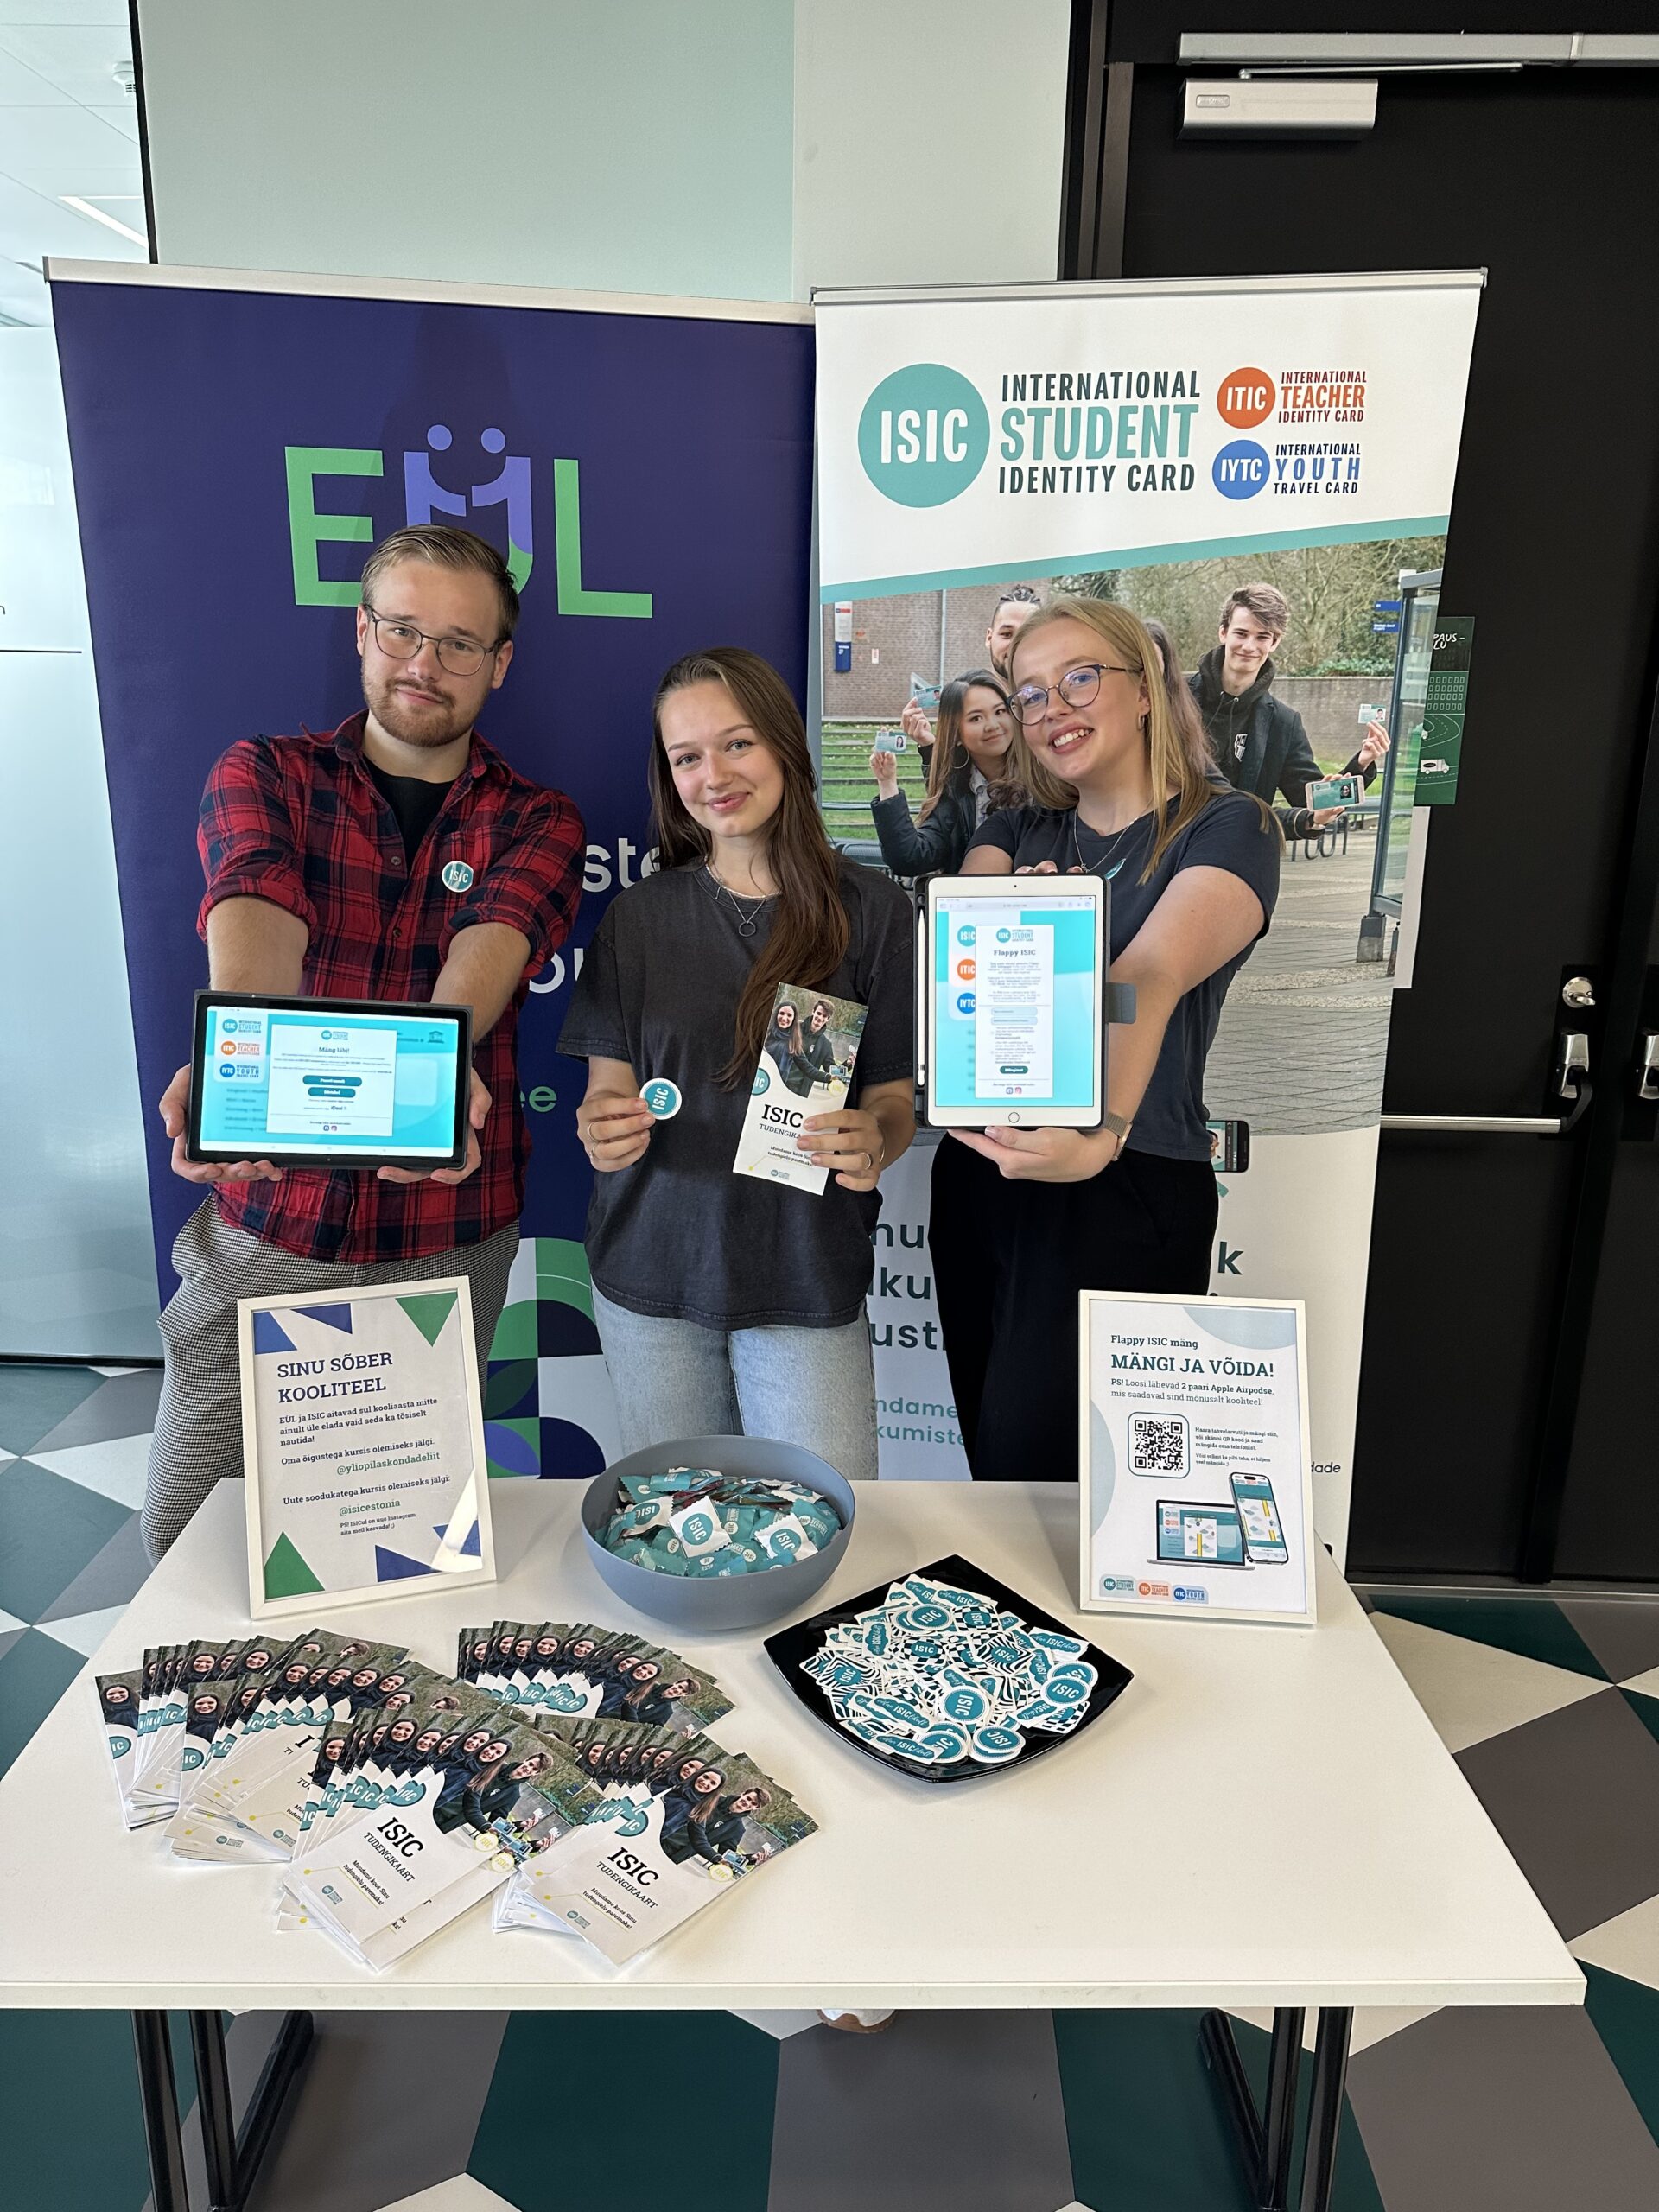 The Federation of Estonian Student Unions marketing campaign at student events to aquire new customers and engage existing ones.